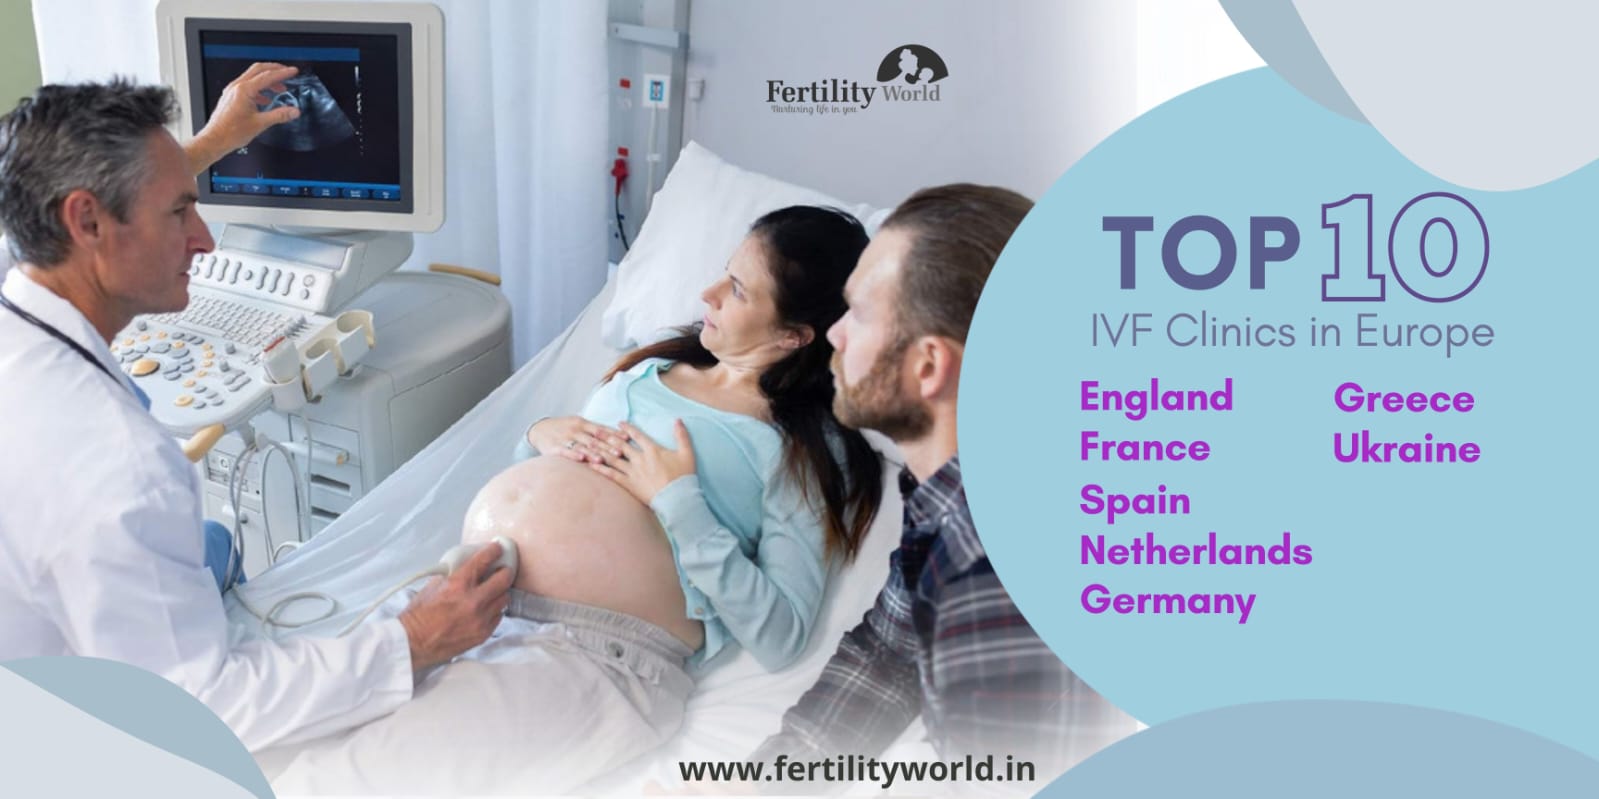 More about the Top 10 IVF Clinics in Europe